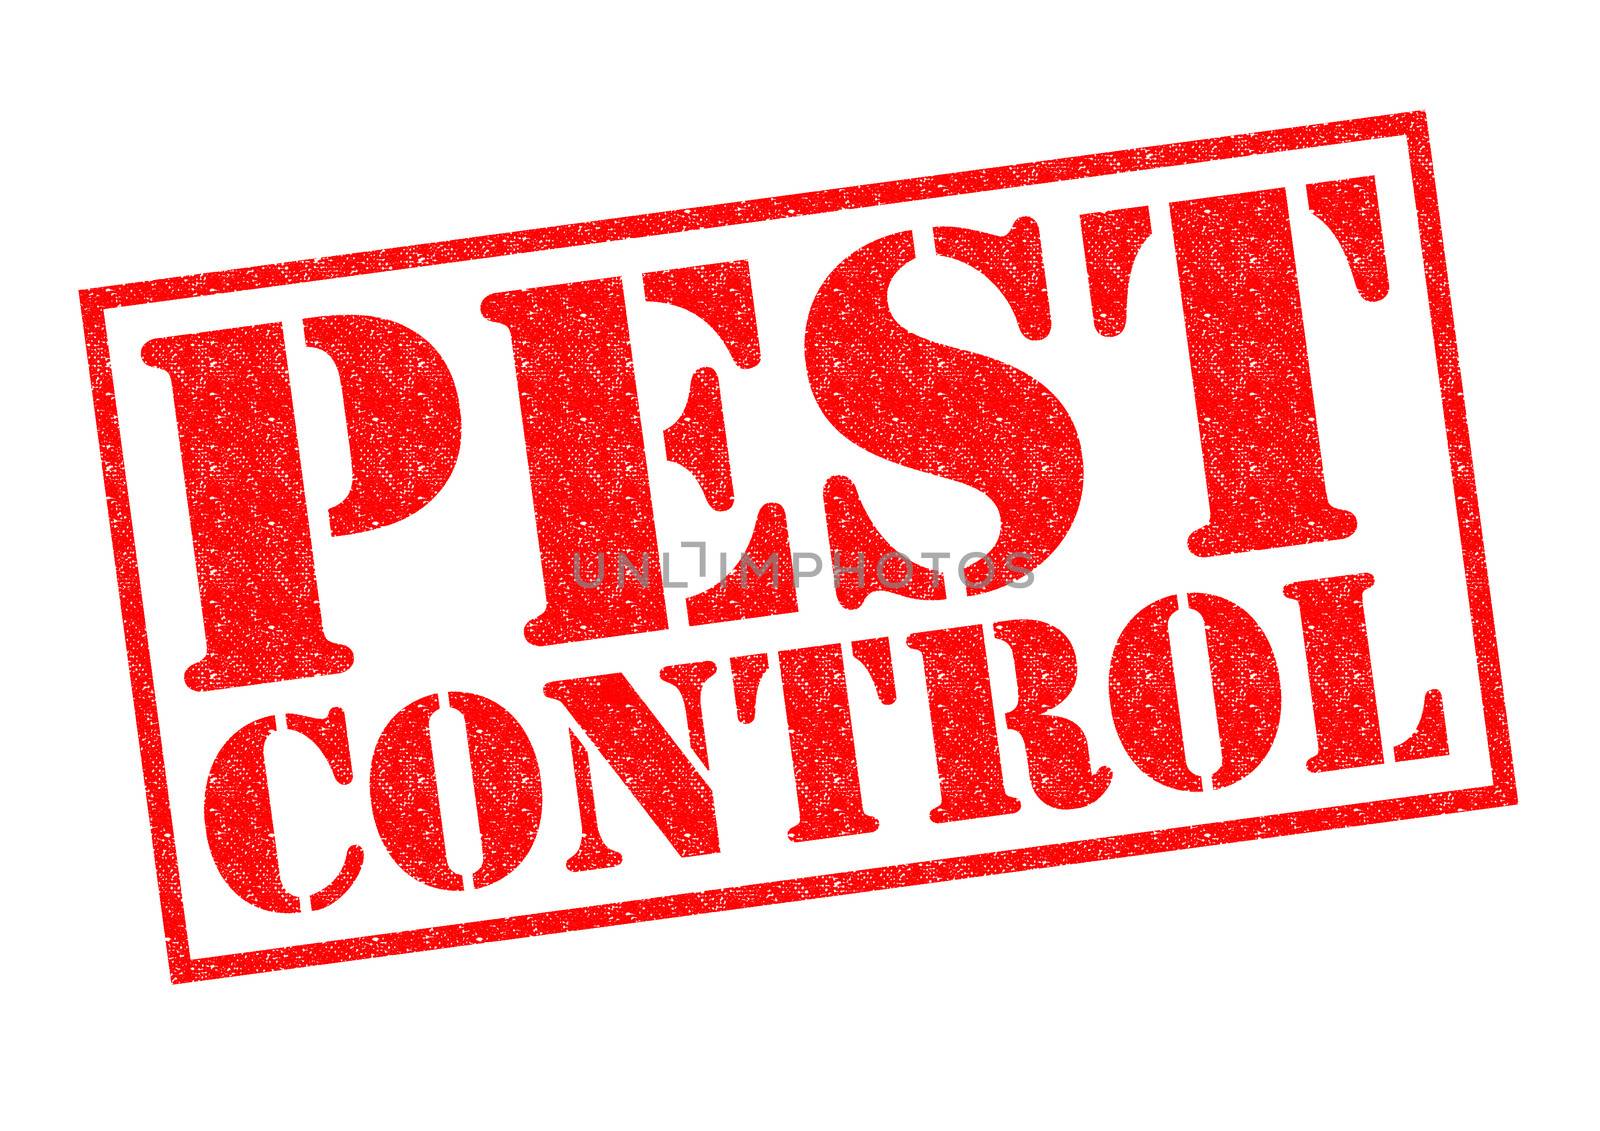 PEST CONTROL red Rubber Stamp over a white background.